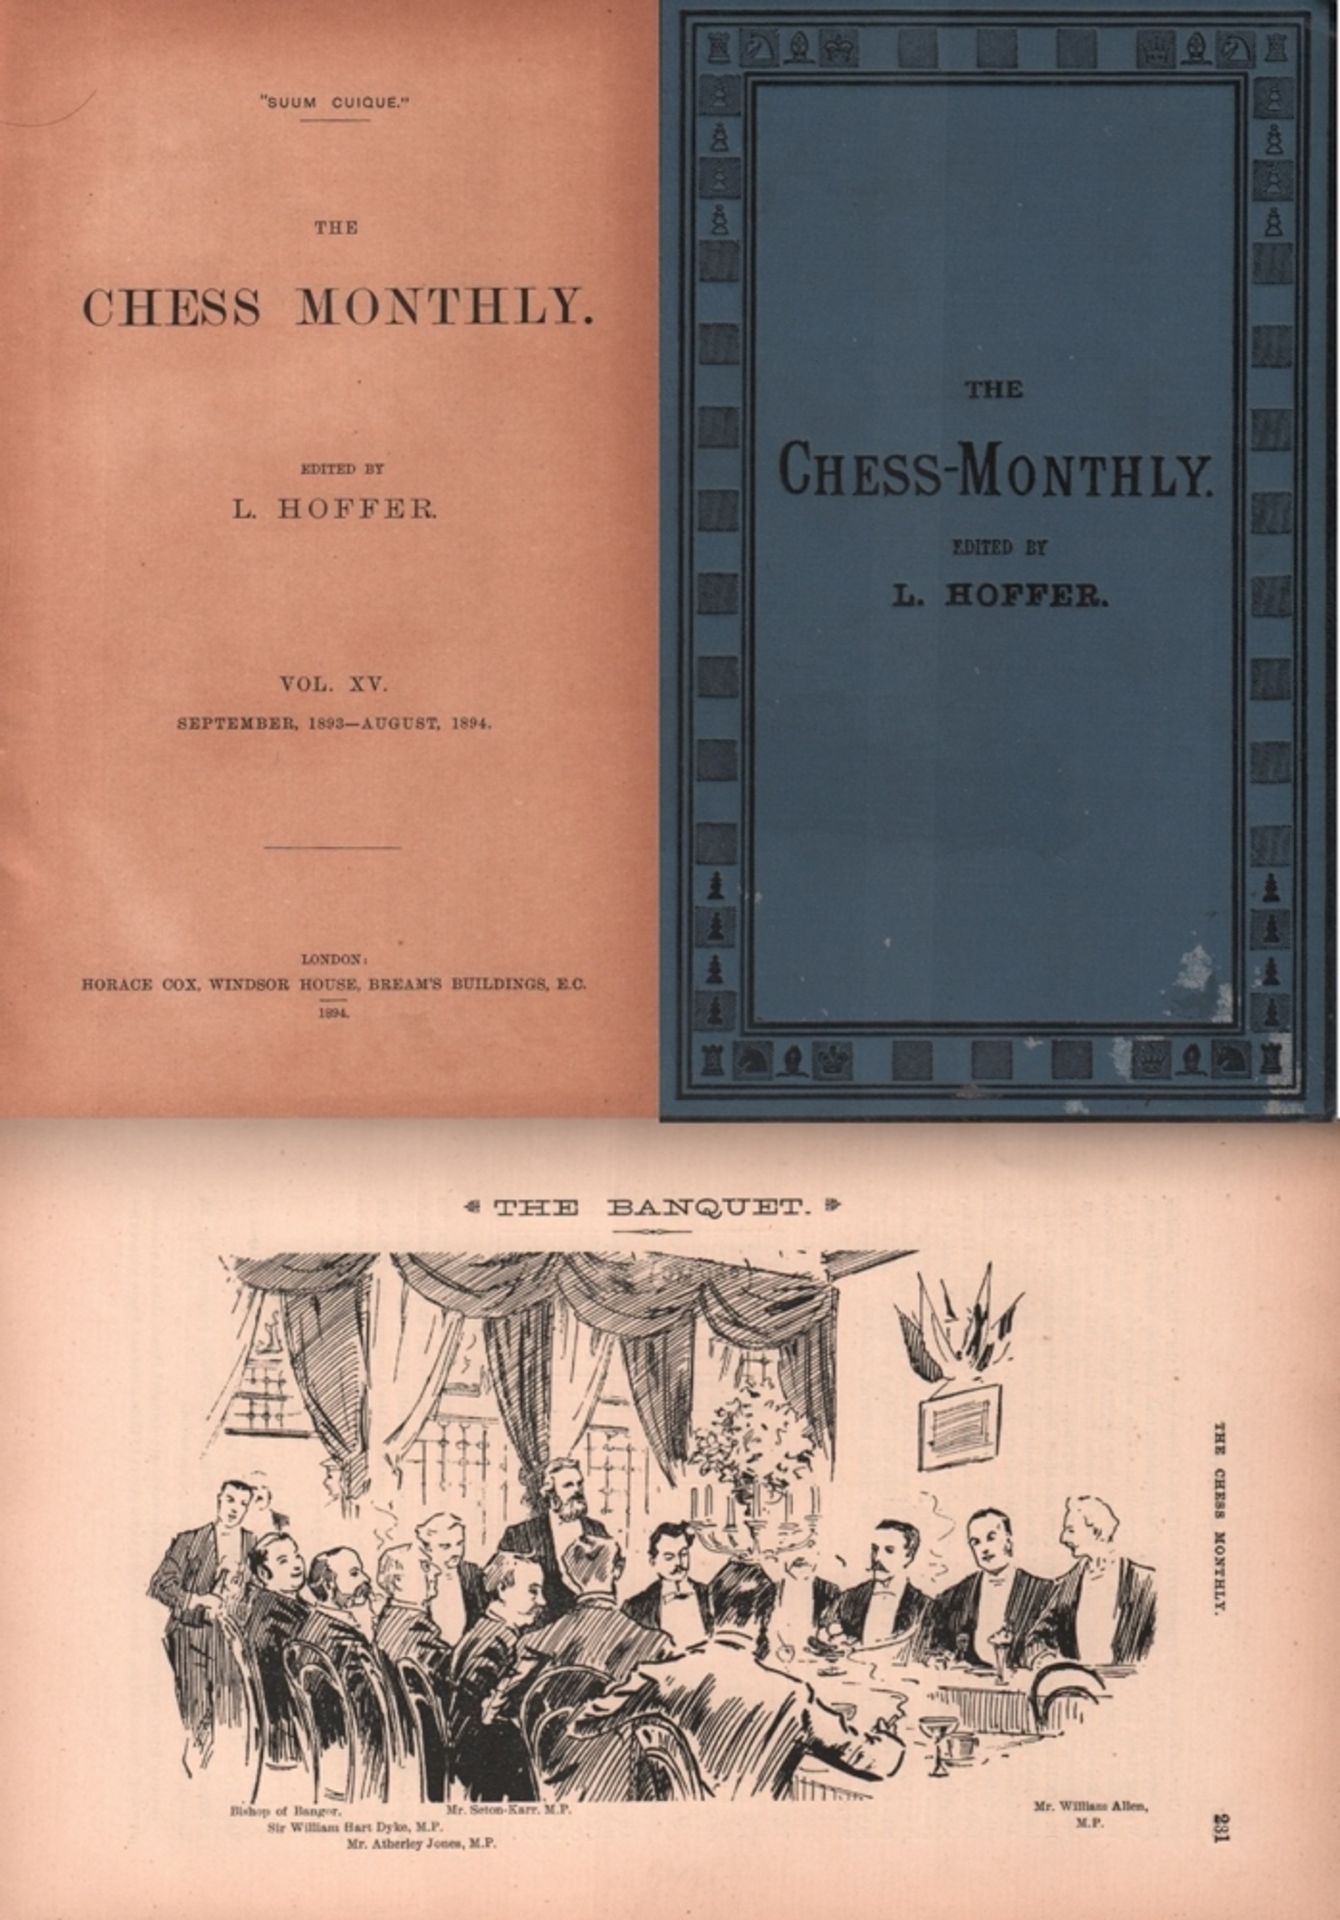 The Chess - Monthly. Edited by L. Hoffer. Volume XV, September 1893 - August 1894. London, Cox,